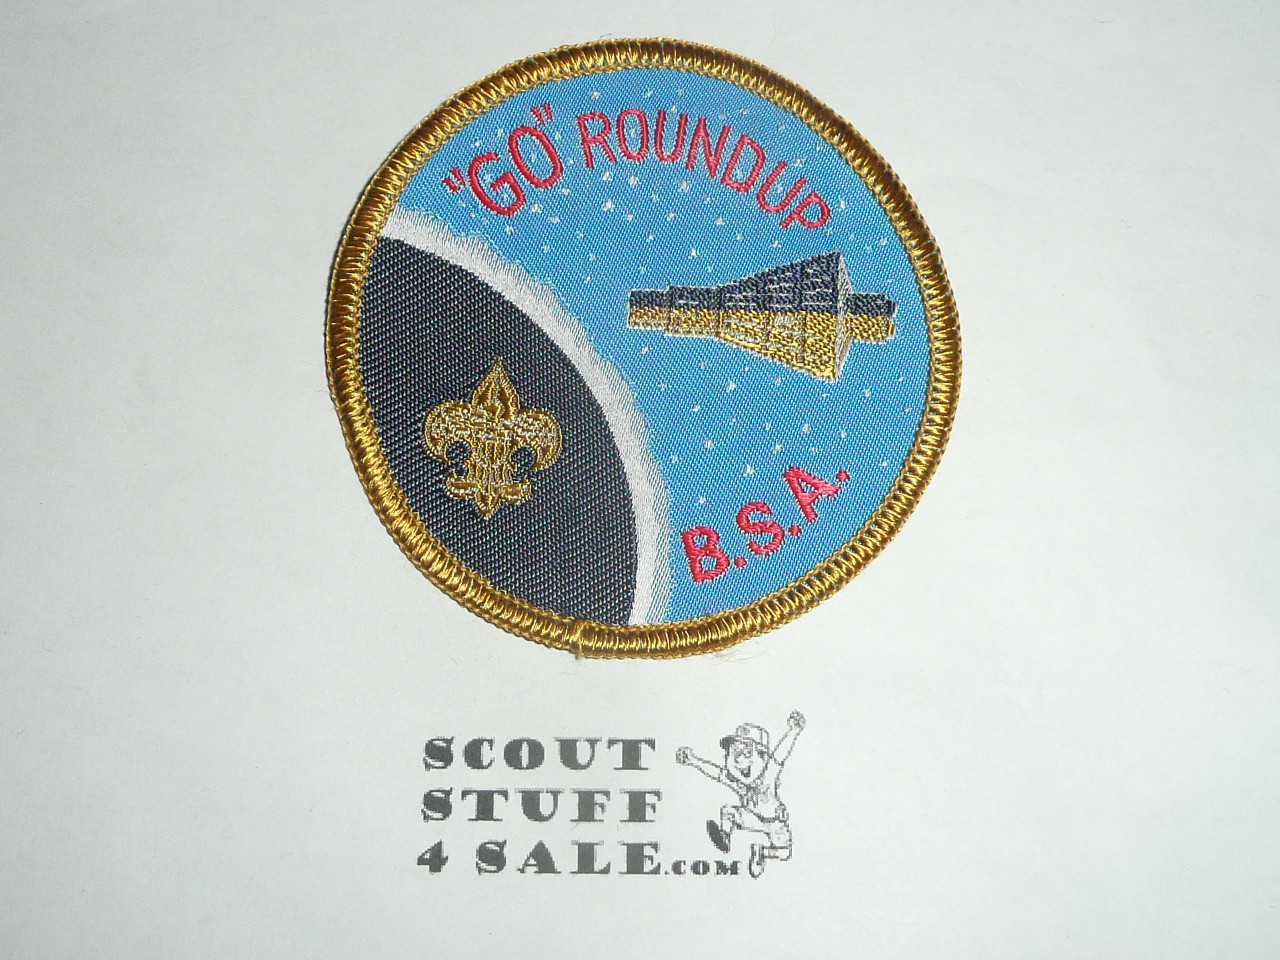 Round-up Patch, Generic BSA issue, blue Woven, beige r/e bdr, Go Roundup